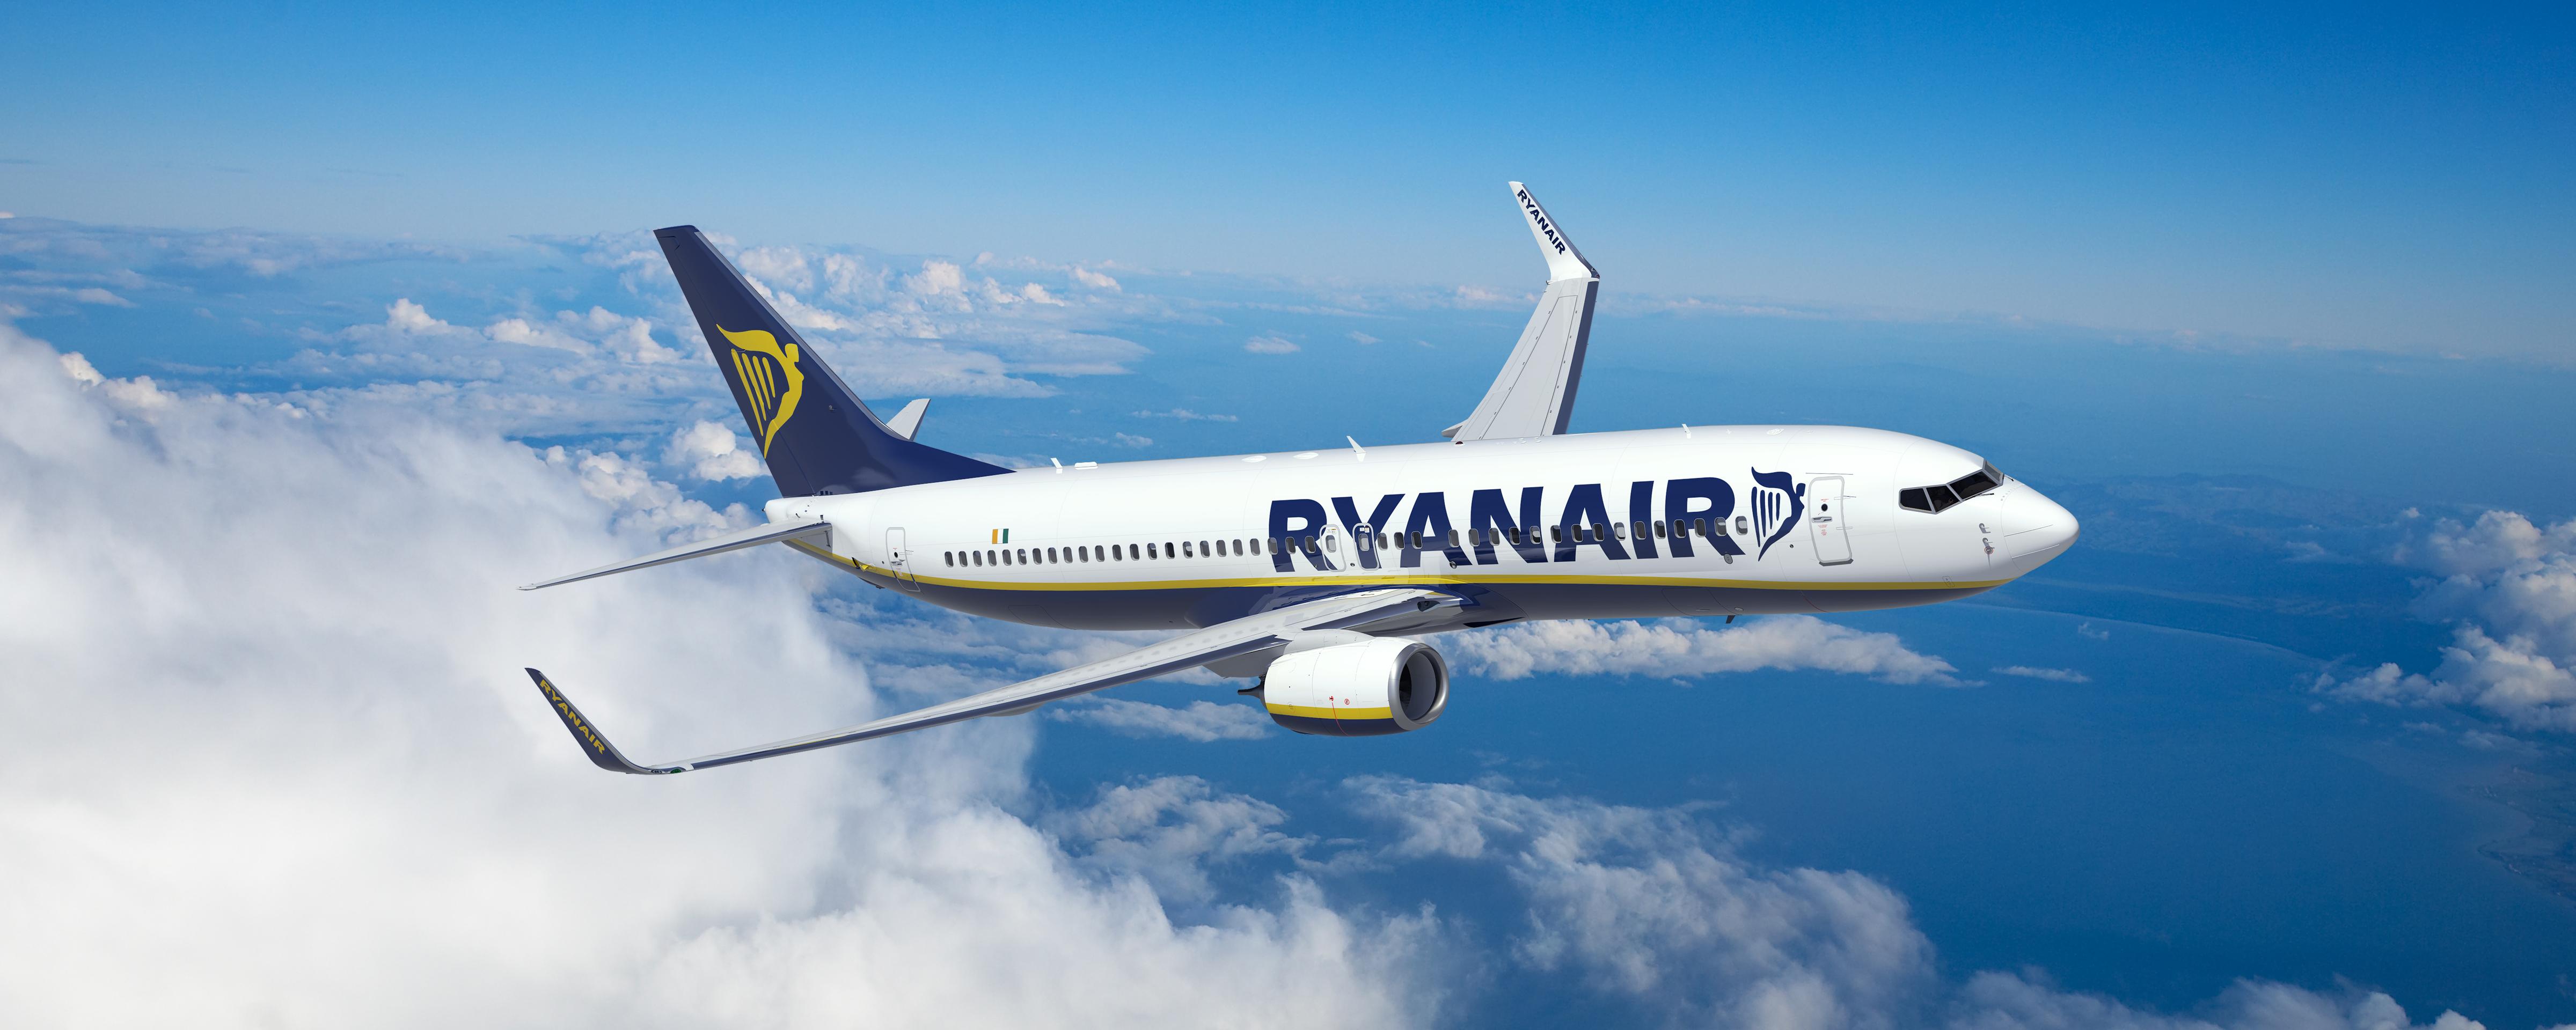 Ryanair Takes Off In Two New Greek Airports  2 New Routes From Preveza-Aktion And Kavala For Summer 19